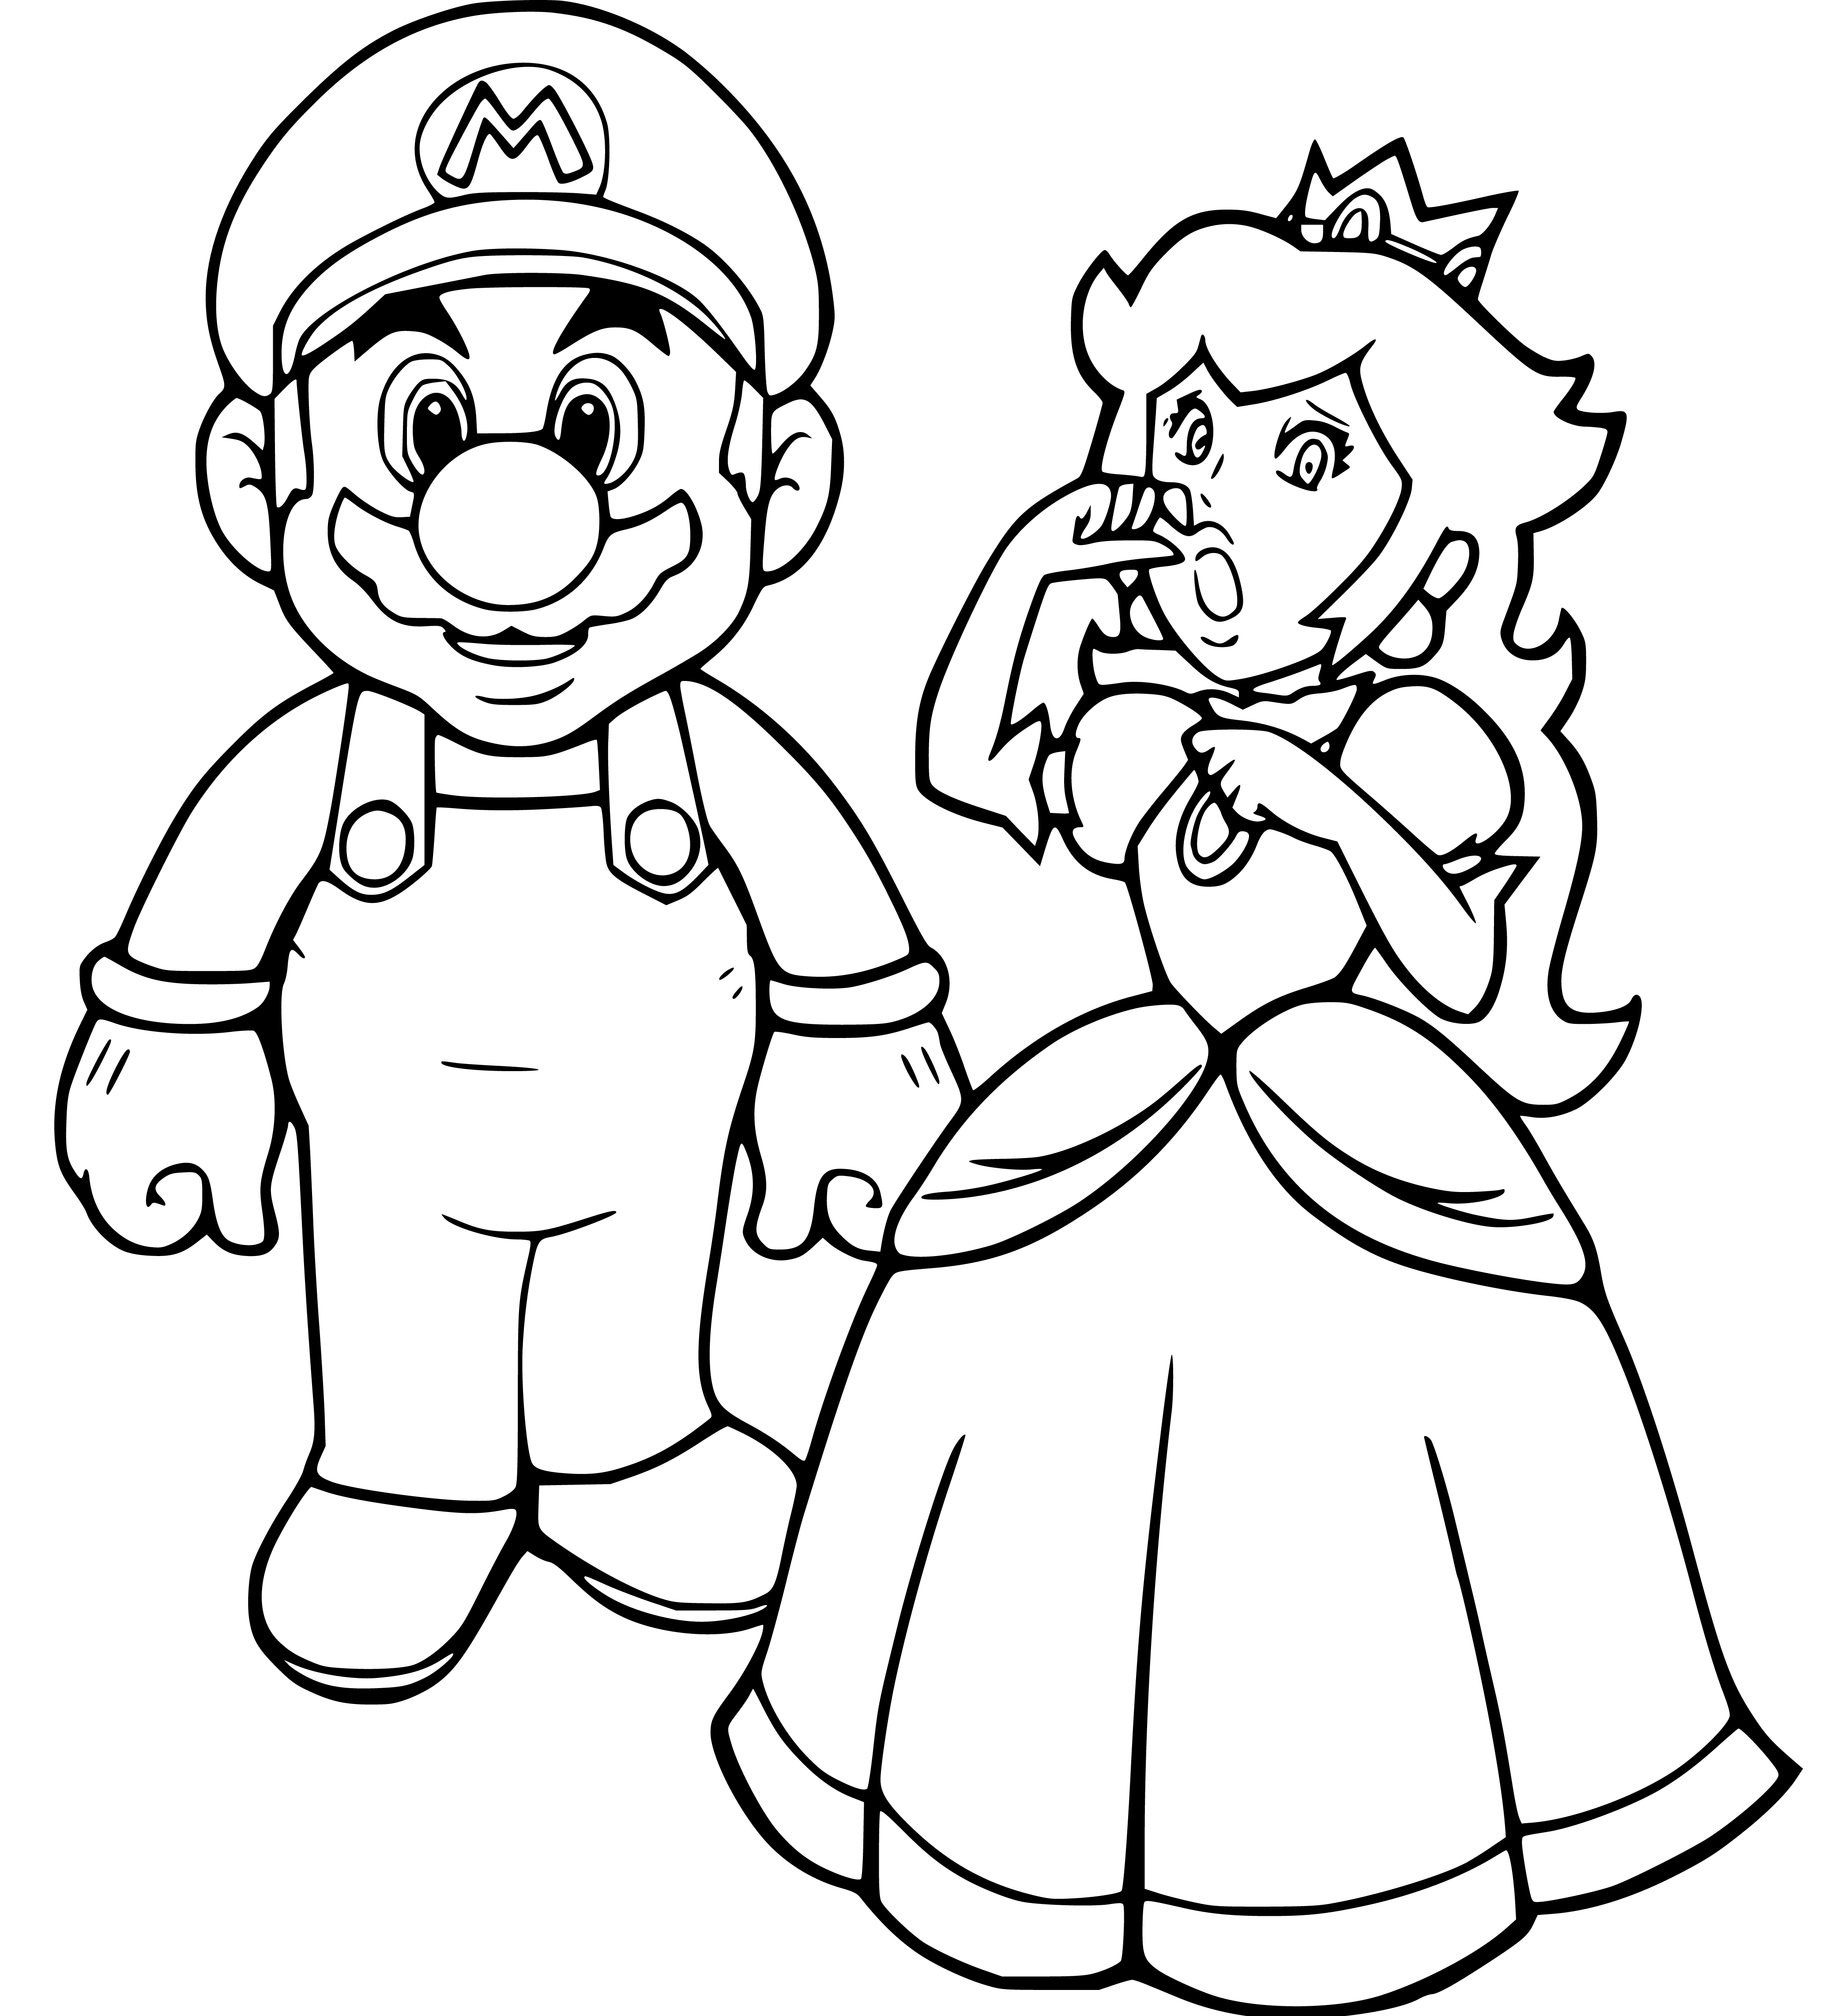 Mario and Princess Peach Coloring Pages for Kids Printable Simple - SheetalColor.com